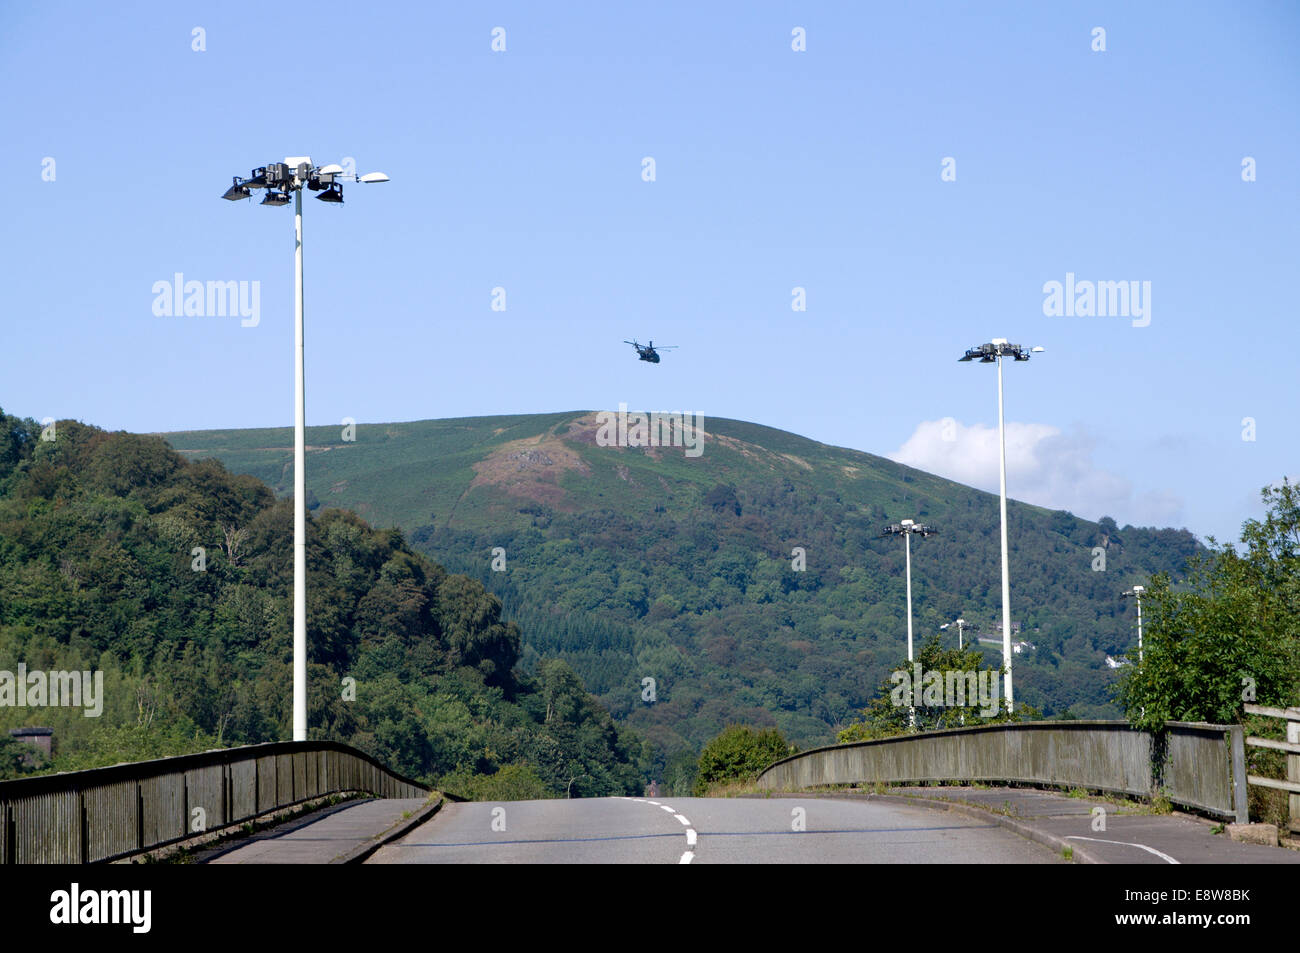 Helicopter above road with The Garth Mountain in the distance, Taffs Well, South Wales, UK. Stock Photo